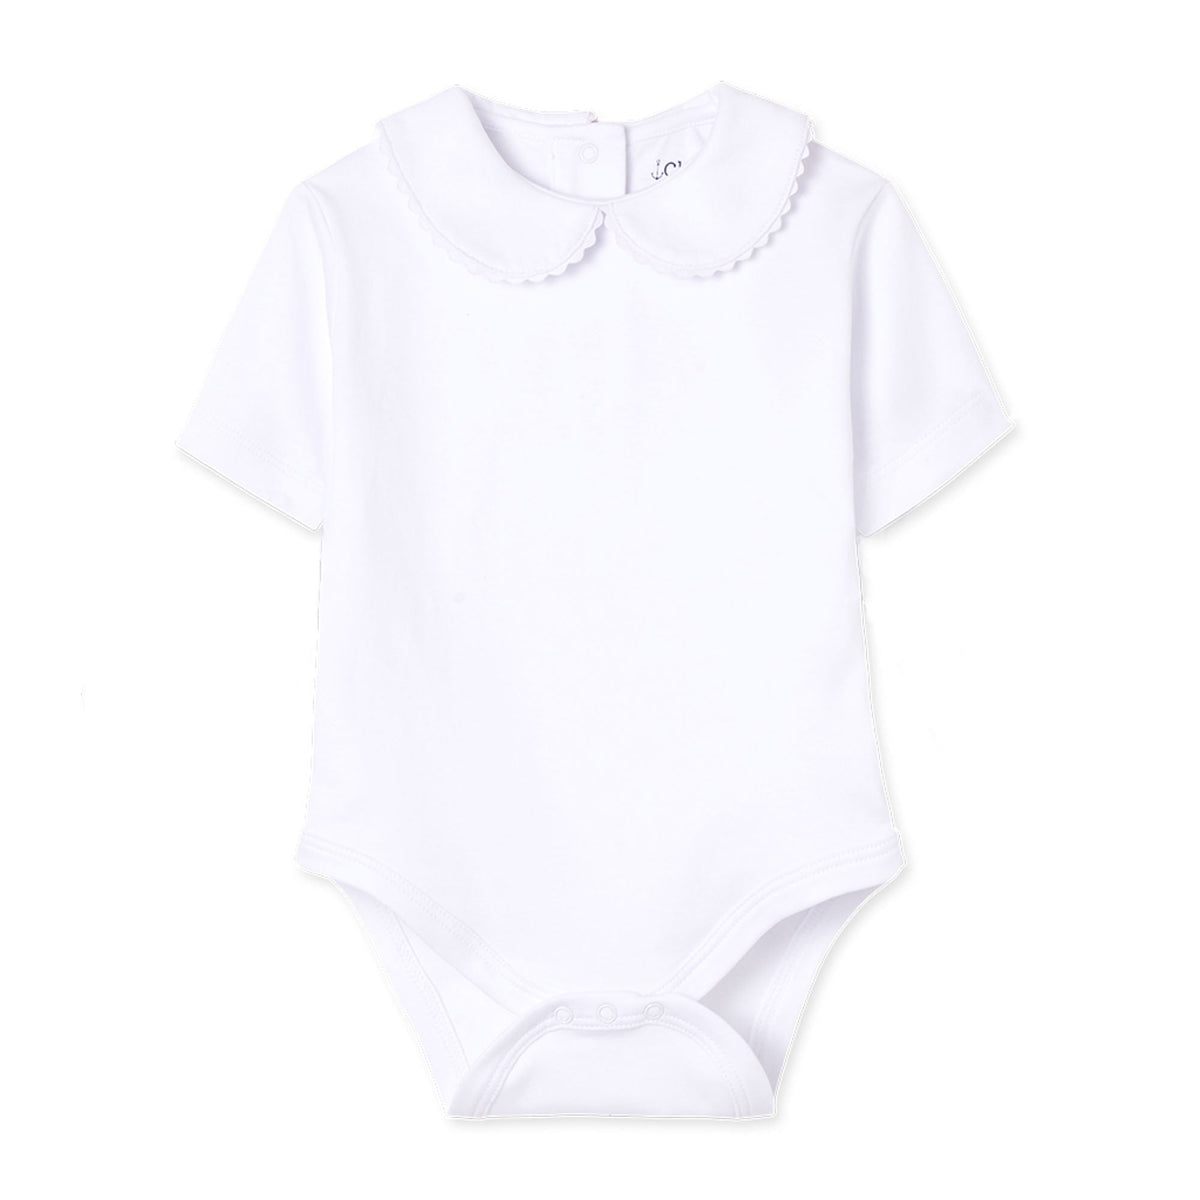 Classic and Preppy Izzy Short Sleeve Onesie, White with White Ric Rac-Baby Rompers-Bright White with Bright White Ric Rac-0-3M-CPC - Classic Prep Childrenswear